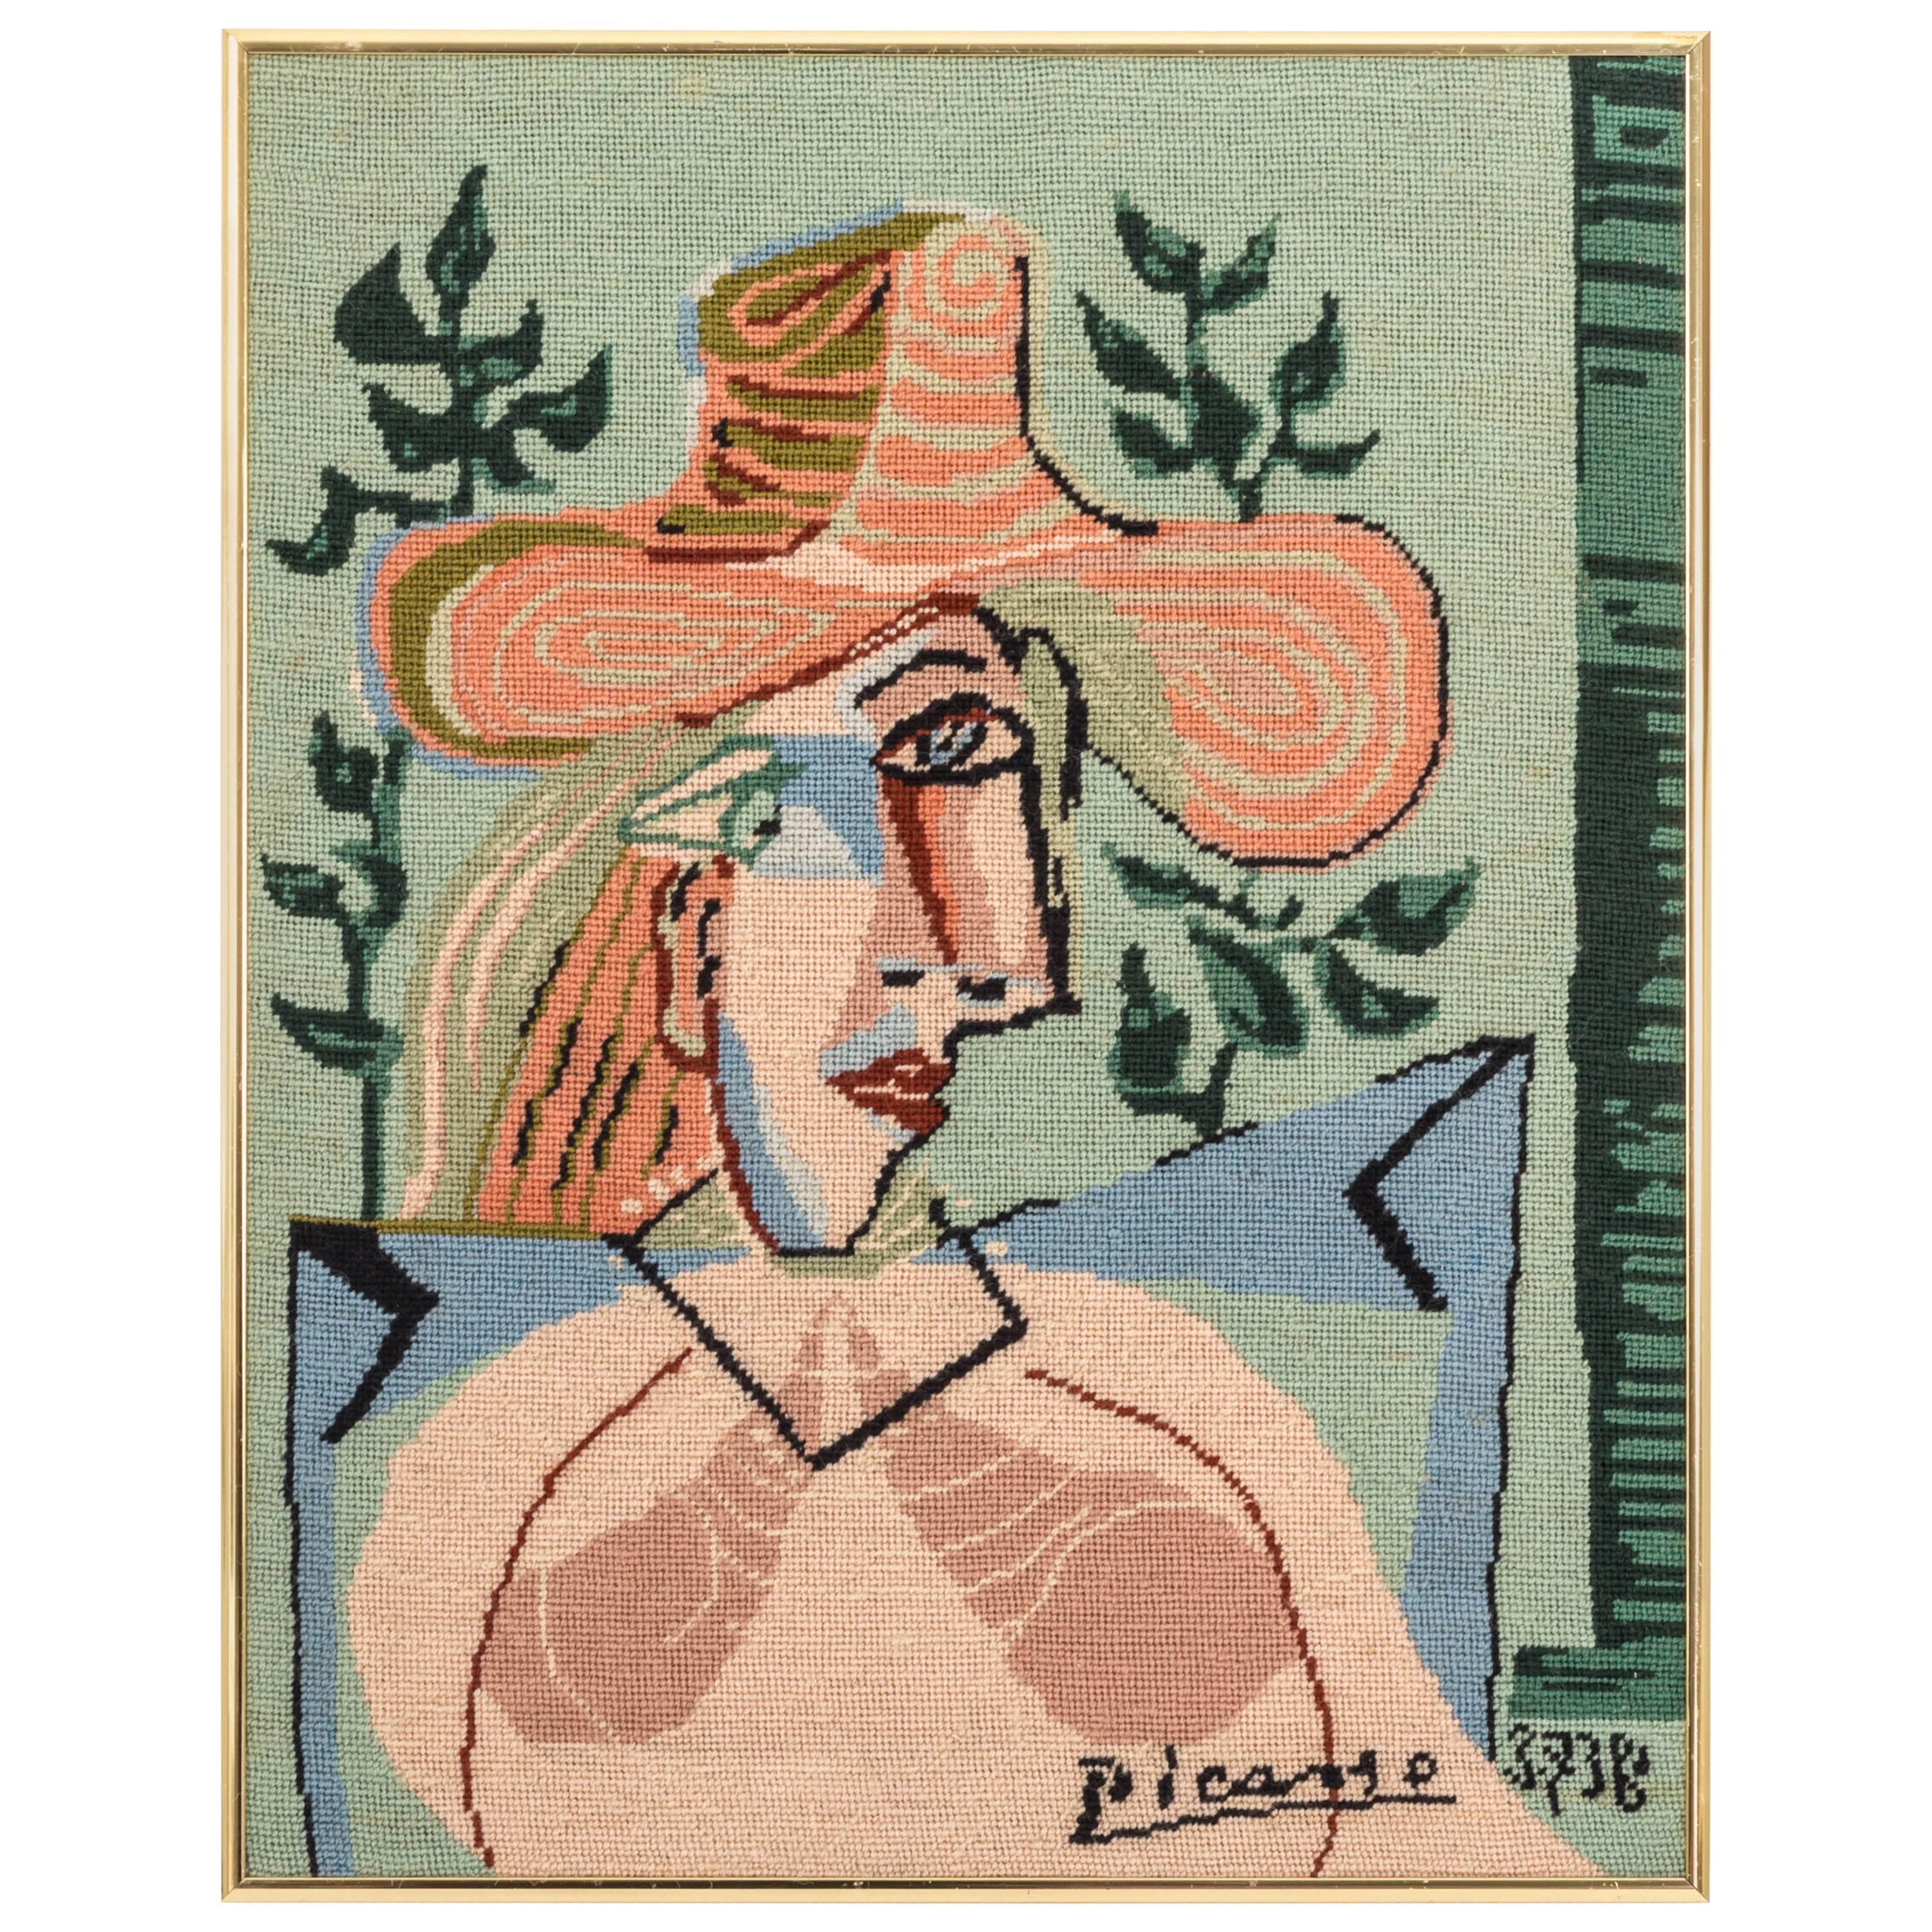 Picasso Portrait in Needlepoint, Lady in Hat